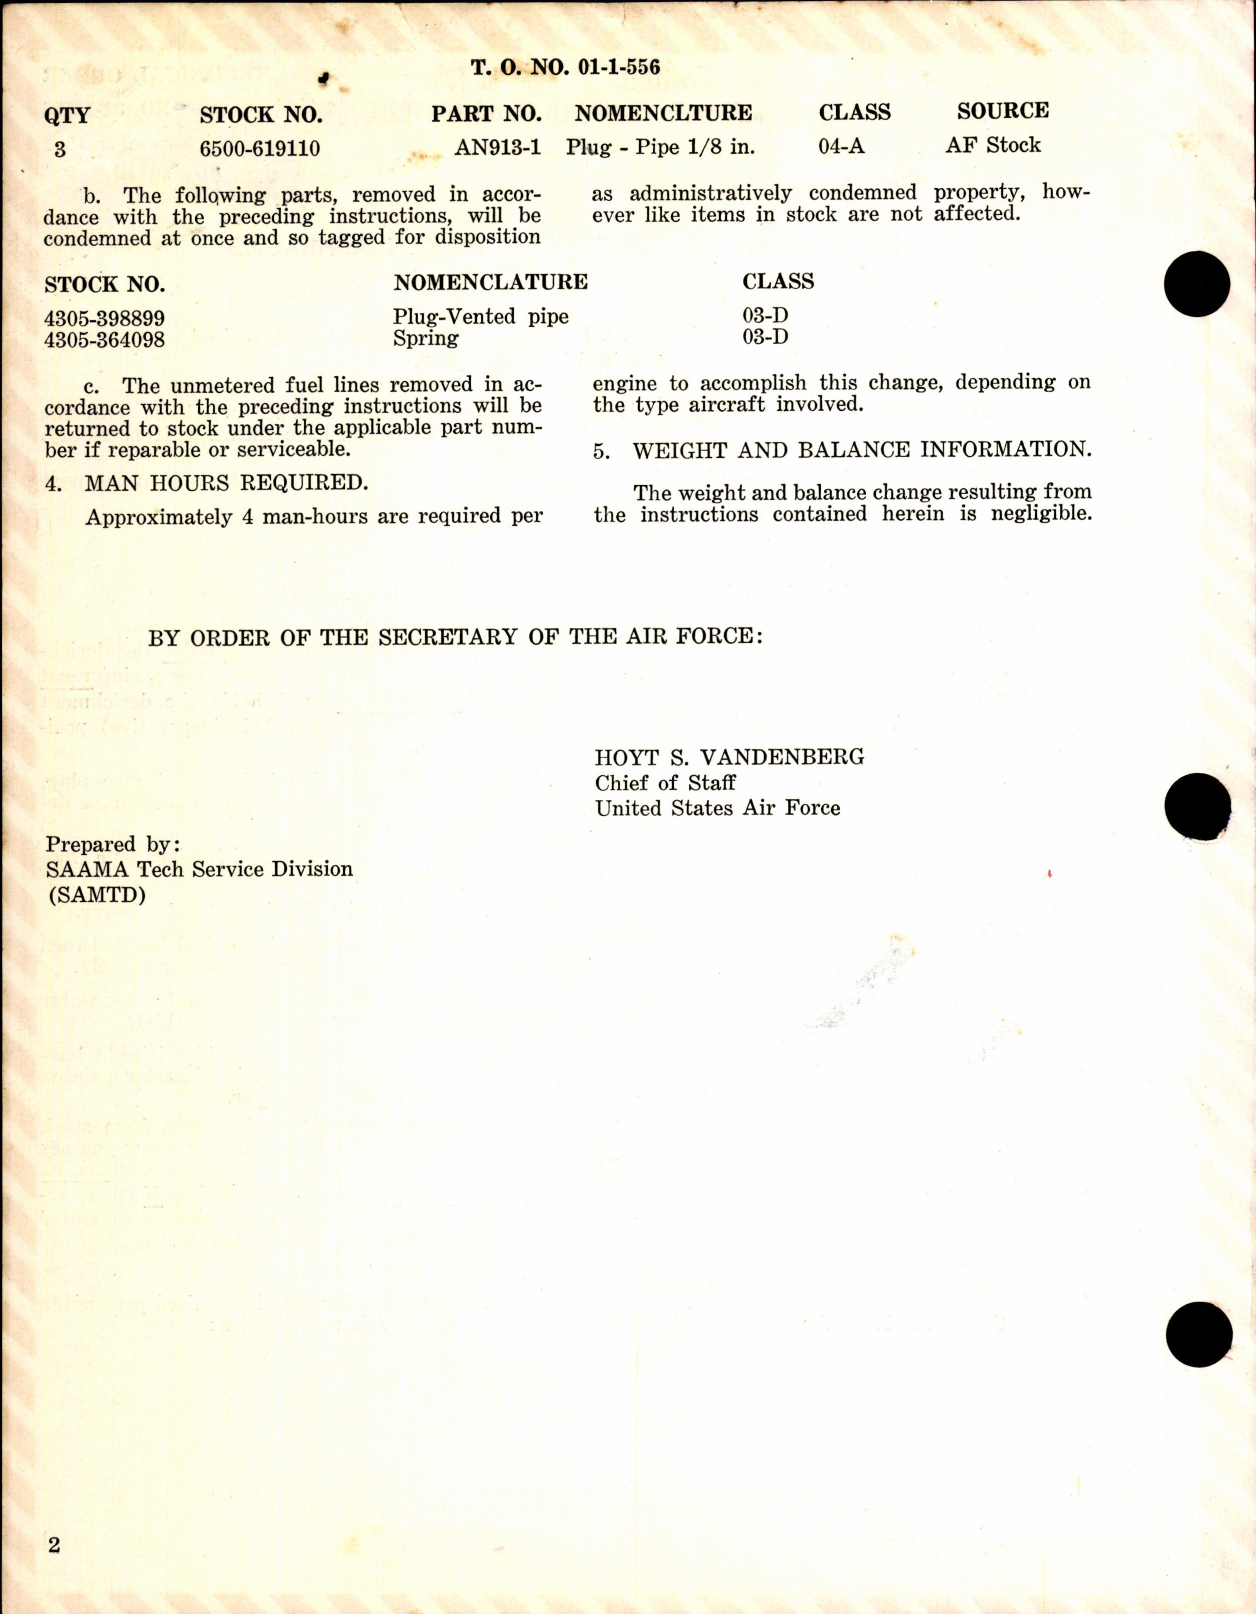 Sample page 2 from AirCorps Library document: Puncturing of Derichment Valve Diaphragms